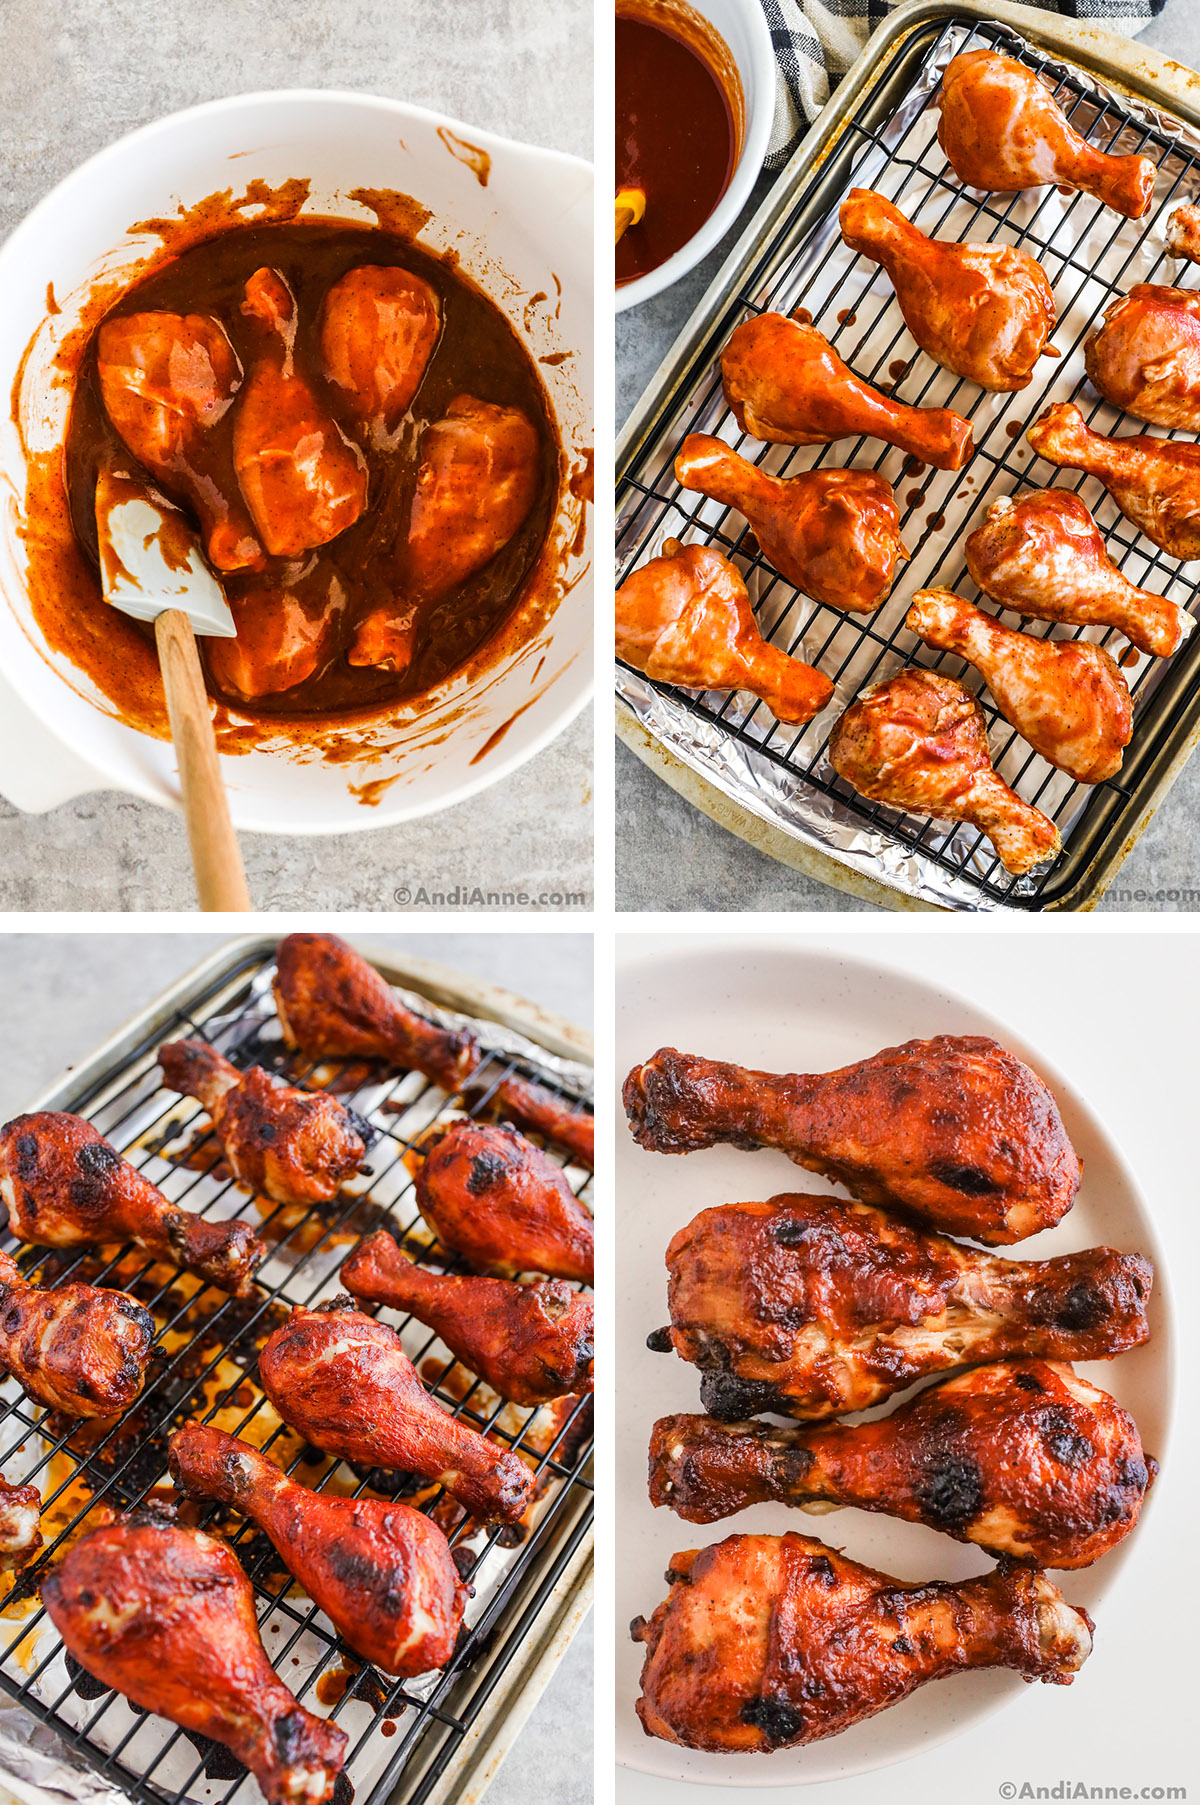 Four images grouped together. First is chicken in sauce in a large bowl, second is raw chicken on a baking sheet rack. third is baked chicken on a rack. Fourth is baked barbecue chicken legs on a plate.